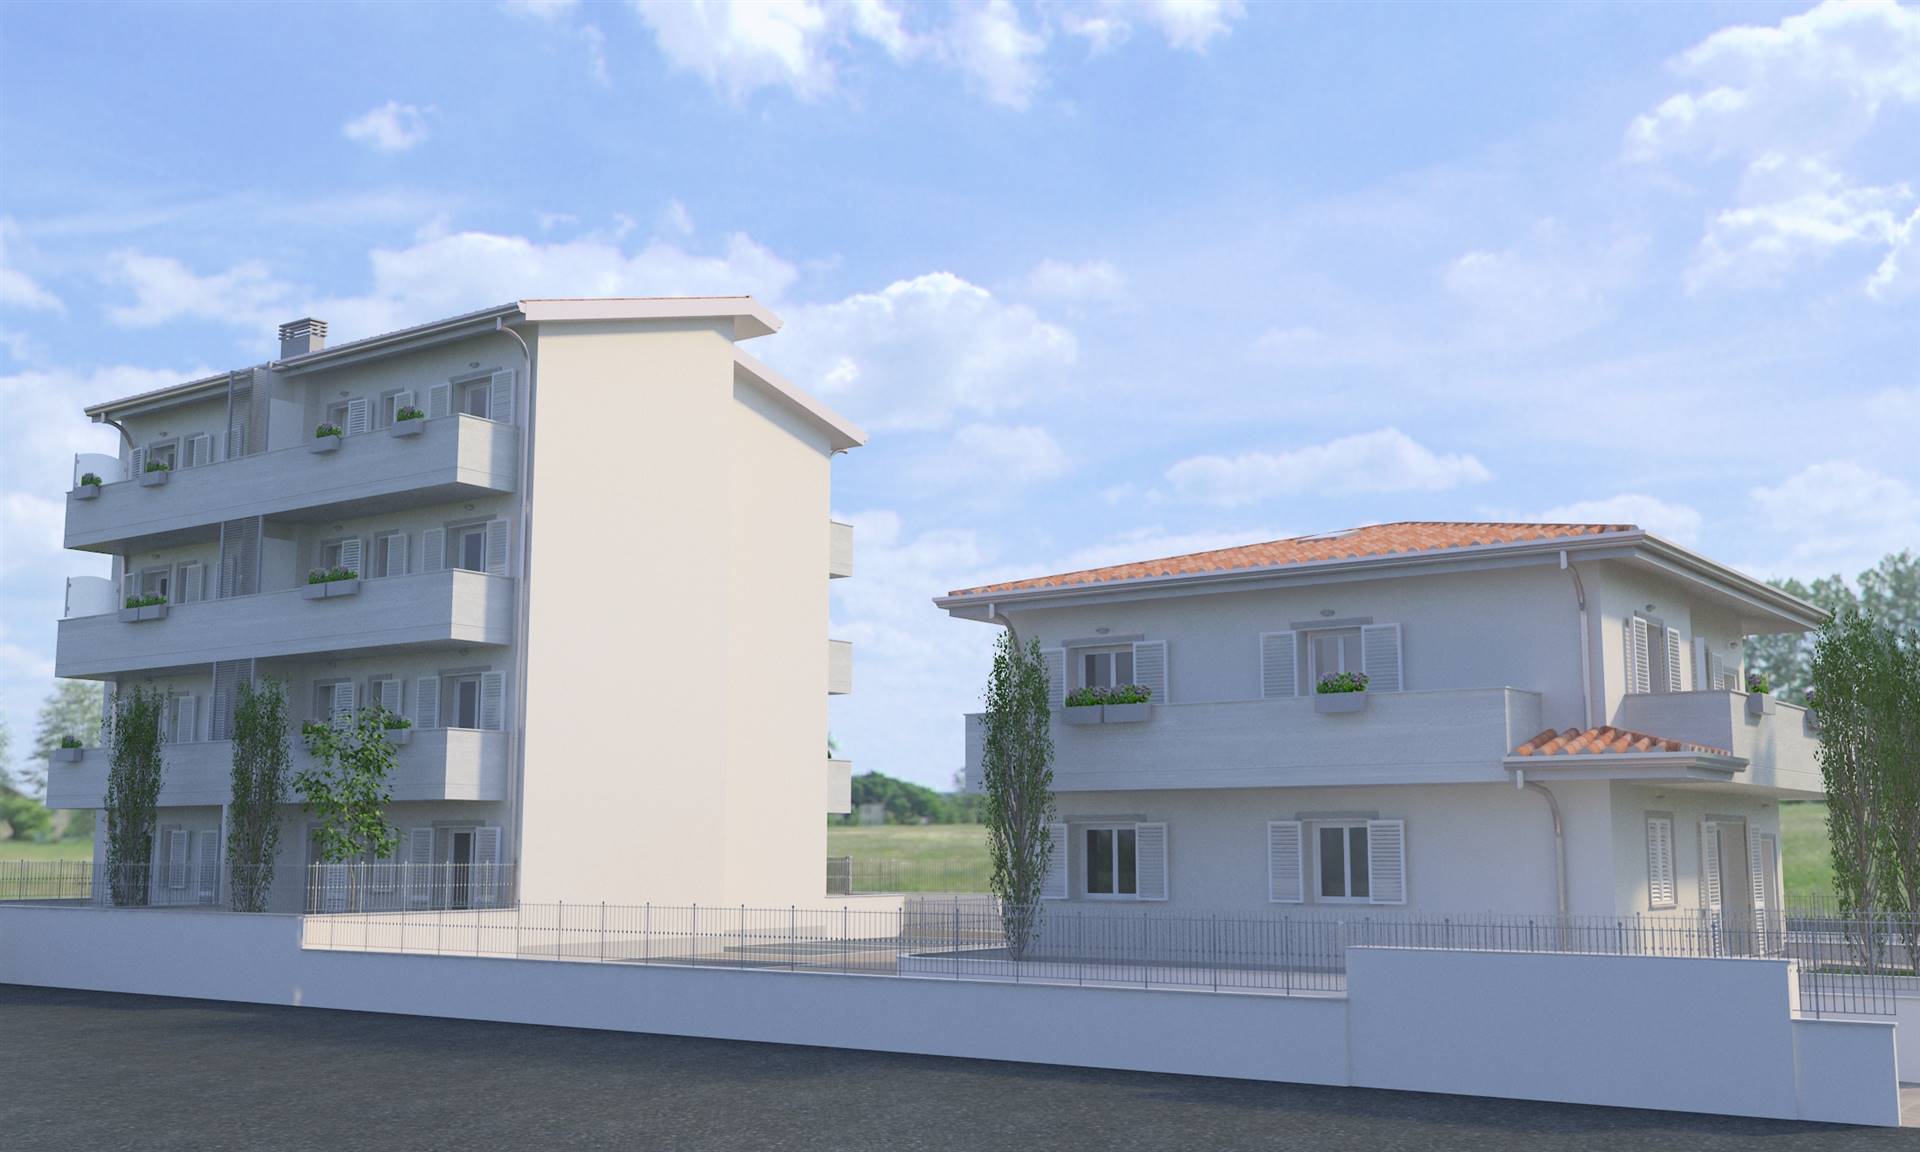 SAN LORENZO, CAMPI BISENZIO, Apartment for sale of 75 Sq. mt., New construction, Heating Individual heating system, placed at 1° on 3, composed by: 3.